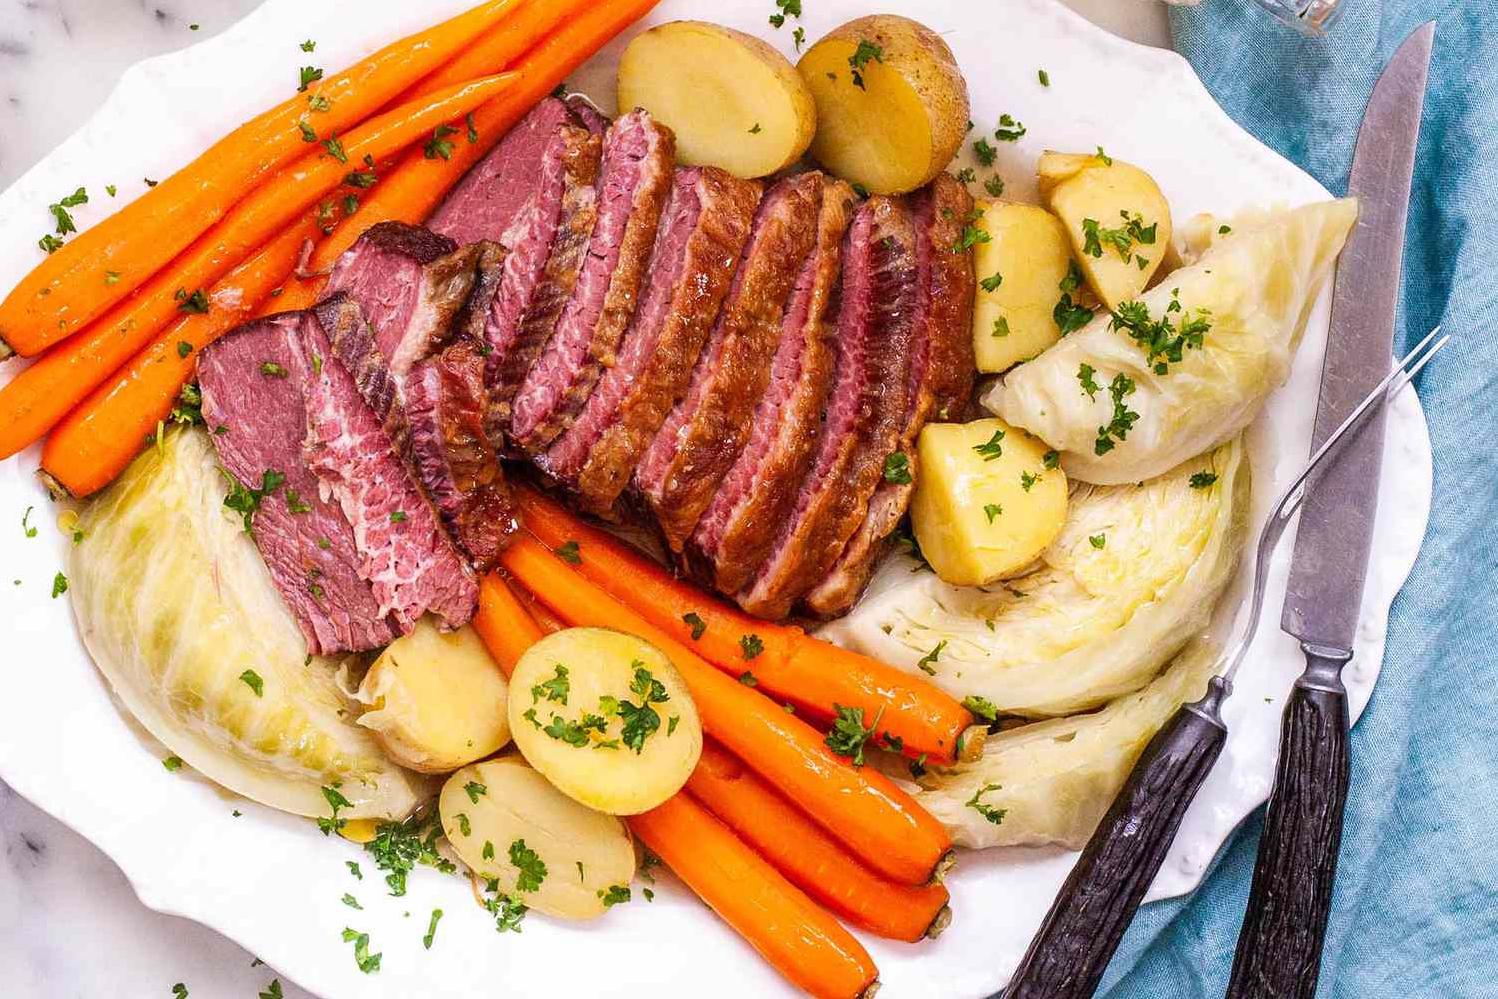  A perfect Irish feast just in time for St. Patrick's Day!